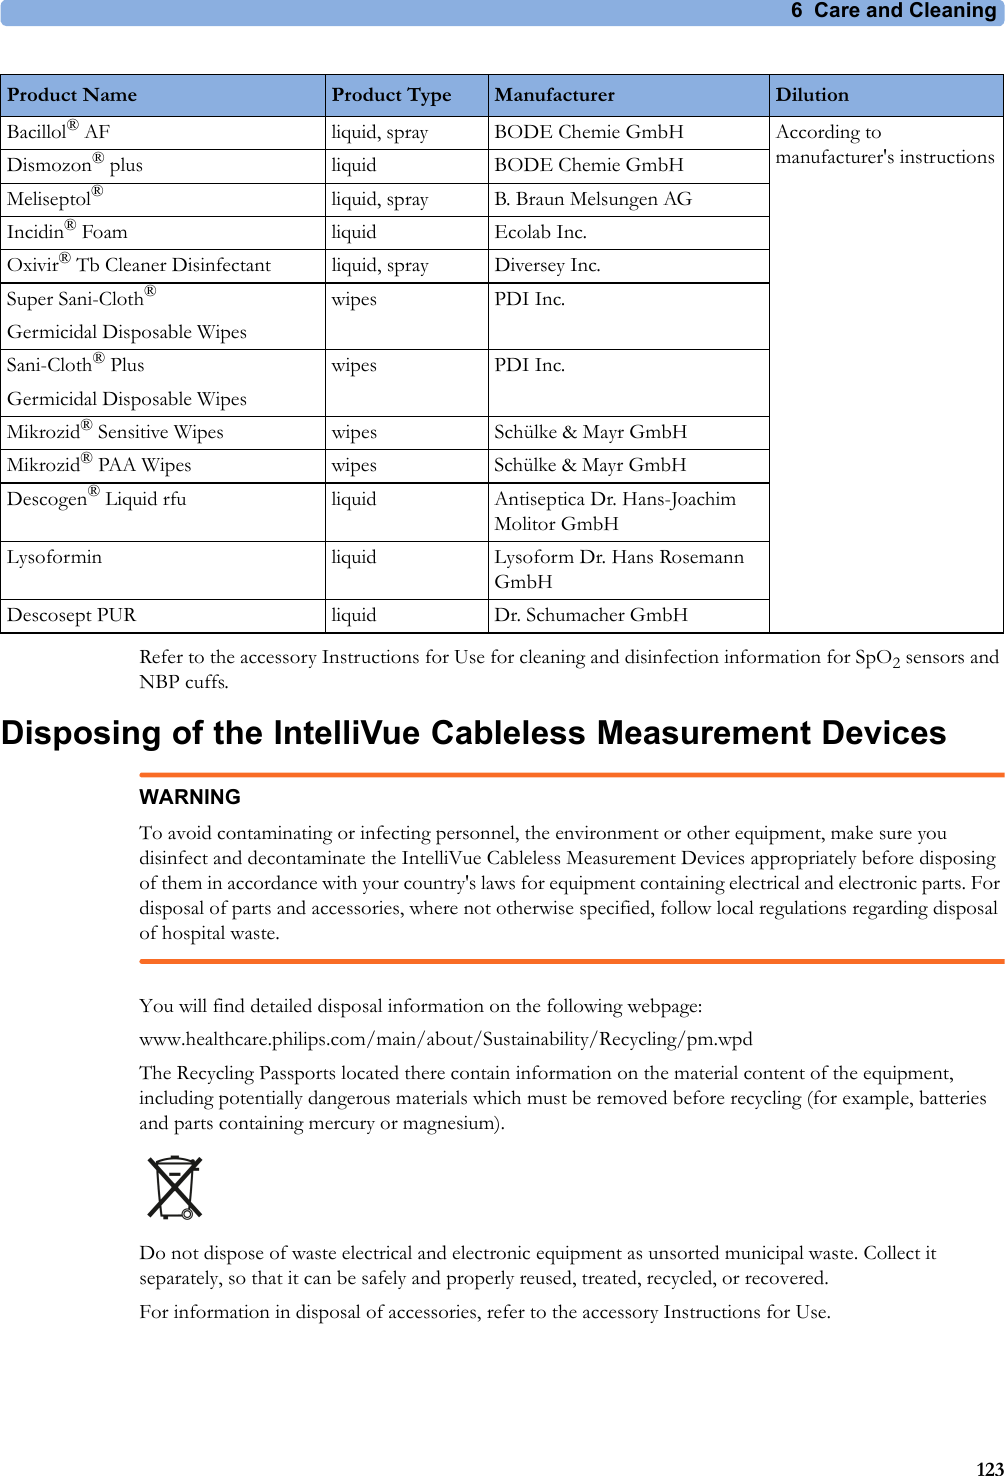 6 Care and Cleaning123Refer to the accessory Instructions for Use for cleaning and disinfection information for SpO2 sensors and NBP cuffs.Disposing of the IntelliVue Cableless Measurement DevicesWARNINGTo avoid contaminating or infecting personnel, the environment or other equipment, make sure you disinfect and decontaminate the IntelliVue Cableless Measurement Devices appropriately before disposing of them in accordance with your country&apos;s laws for equipment containing electrical and electronic parts. For disposal of parts and accessories, where not otherwise specified, follow local regulations regarding disposal of hospital waste.You will find detailed disposal information on the following webpage:www.healthcare.philips.com/main/about/Sustainability/Recycling/pm.wpdThe Recycling Passports located there contain information on the material content of the equipment, including potentially dangerous materials which must be removed before recycling (for example, batteries and parts containing mercury or magnesium).Do not dispose of waste electrical and electronic equipment as unsorted municipal waste. Collect it separately, so that it can be safely and properly reused, treated, recycled, or recovered.For information in disposal of accessories, refer to the accessory Instructions for Use.Bacillol® AF liquid, spray BODE Chemie GmbH According to manufacturer&apos;s instructionsDismozon® plus liquid BODE Chemie GmbHMeliseptol®liquid, spray B. Braun Melsungen AGIncidin® Foam liquid Ecolab Inc.Oxivir® Tb Cleaner Disinfectant liquid, spray Diversey Inc.Super Sani-Cloth®Germicidal Disposable Wipeswipes PDI Inc.Sani-Cloth® PlusGermicidal Disposable Wipeswipes PDI Inc.Mikrozid® Sensitive Wipes wipes Schülke &amp; Mayr GmbHMikrozid® PAA Wipes wipes Schülke &amp; Mayr GmbHDescogen® Liquid rfu liquid Antiseptica Dr. Hans-Joachim Molitor GmbHLysoformin liquid Lysoform Dr. Hans Rosemann GmbHDescosept PUR liquid Dr. Schumacher GmbHProduct Name Product Type Manufacturer Dilution